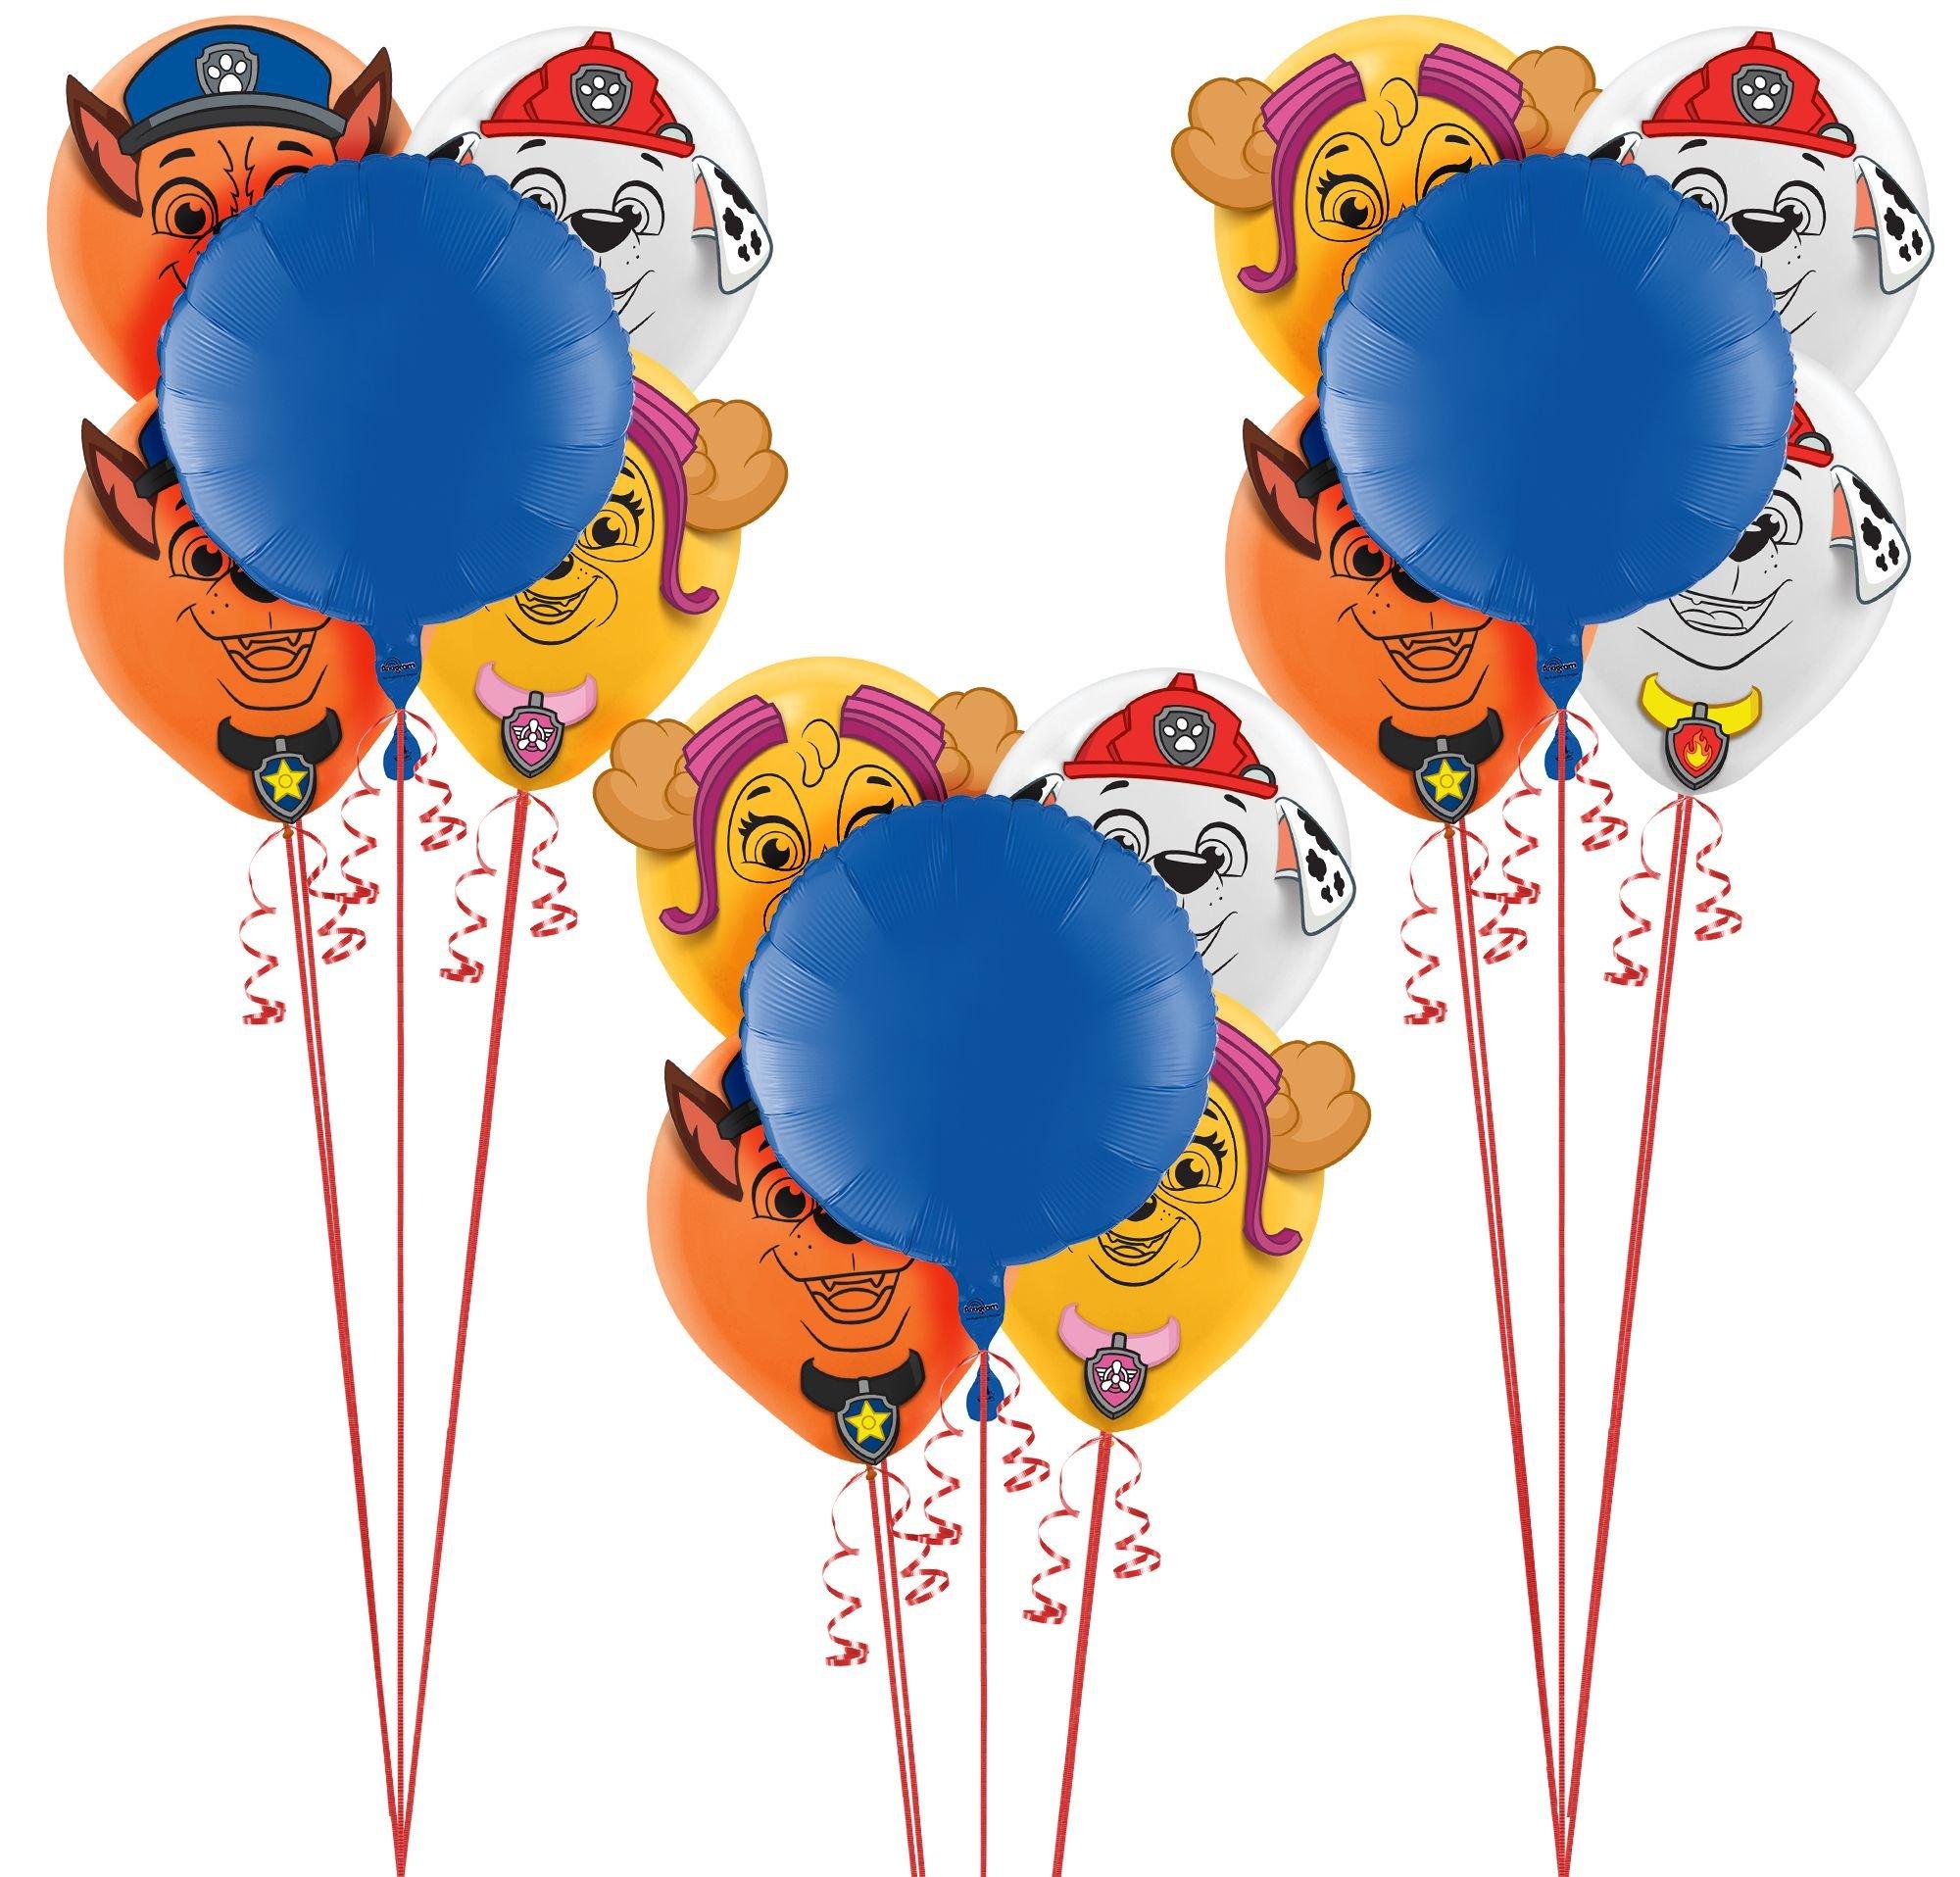 PAW Patrol Adventure Balloon Bouquet Supplies Pack - Kit Includes Foil Balloons & Themed Latex Balloons